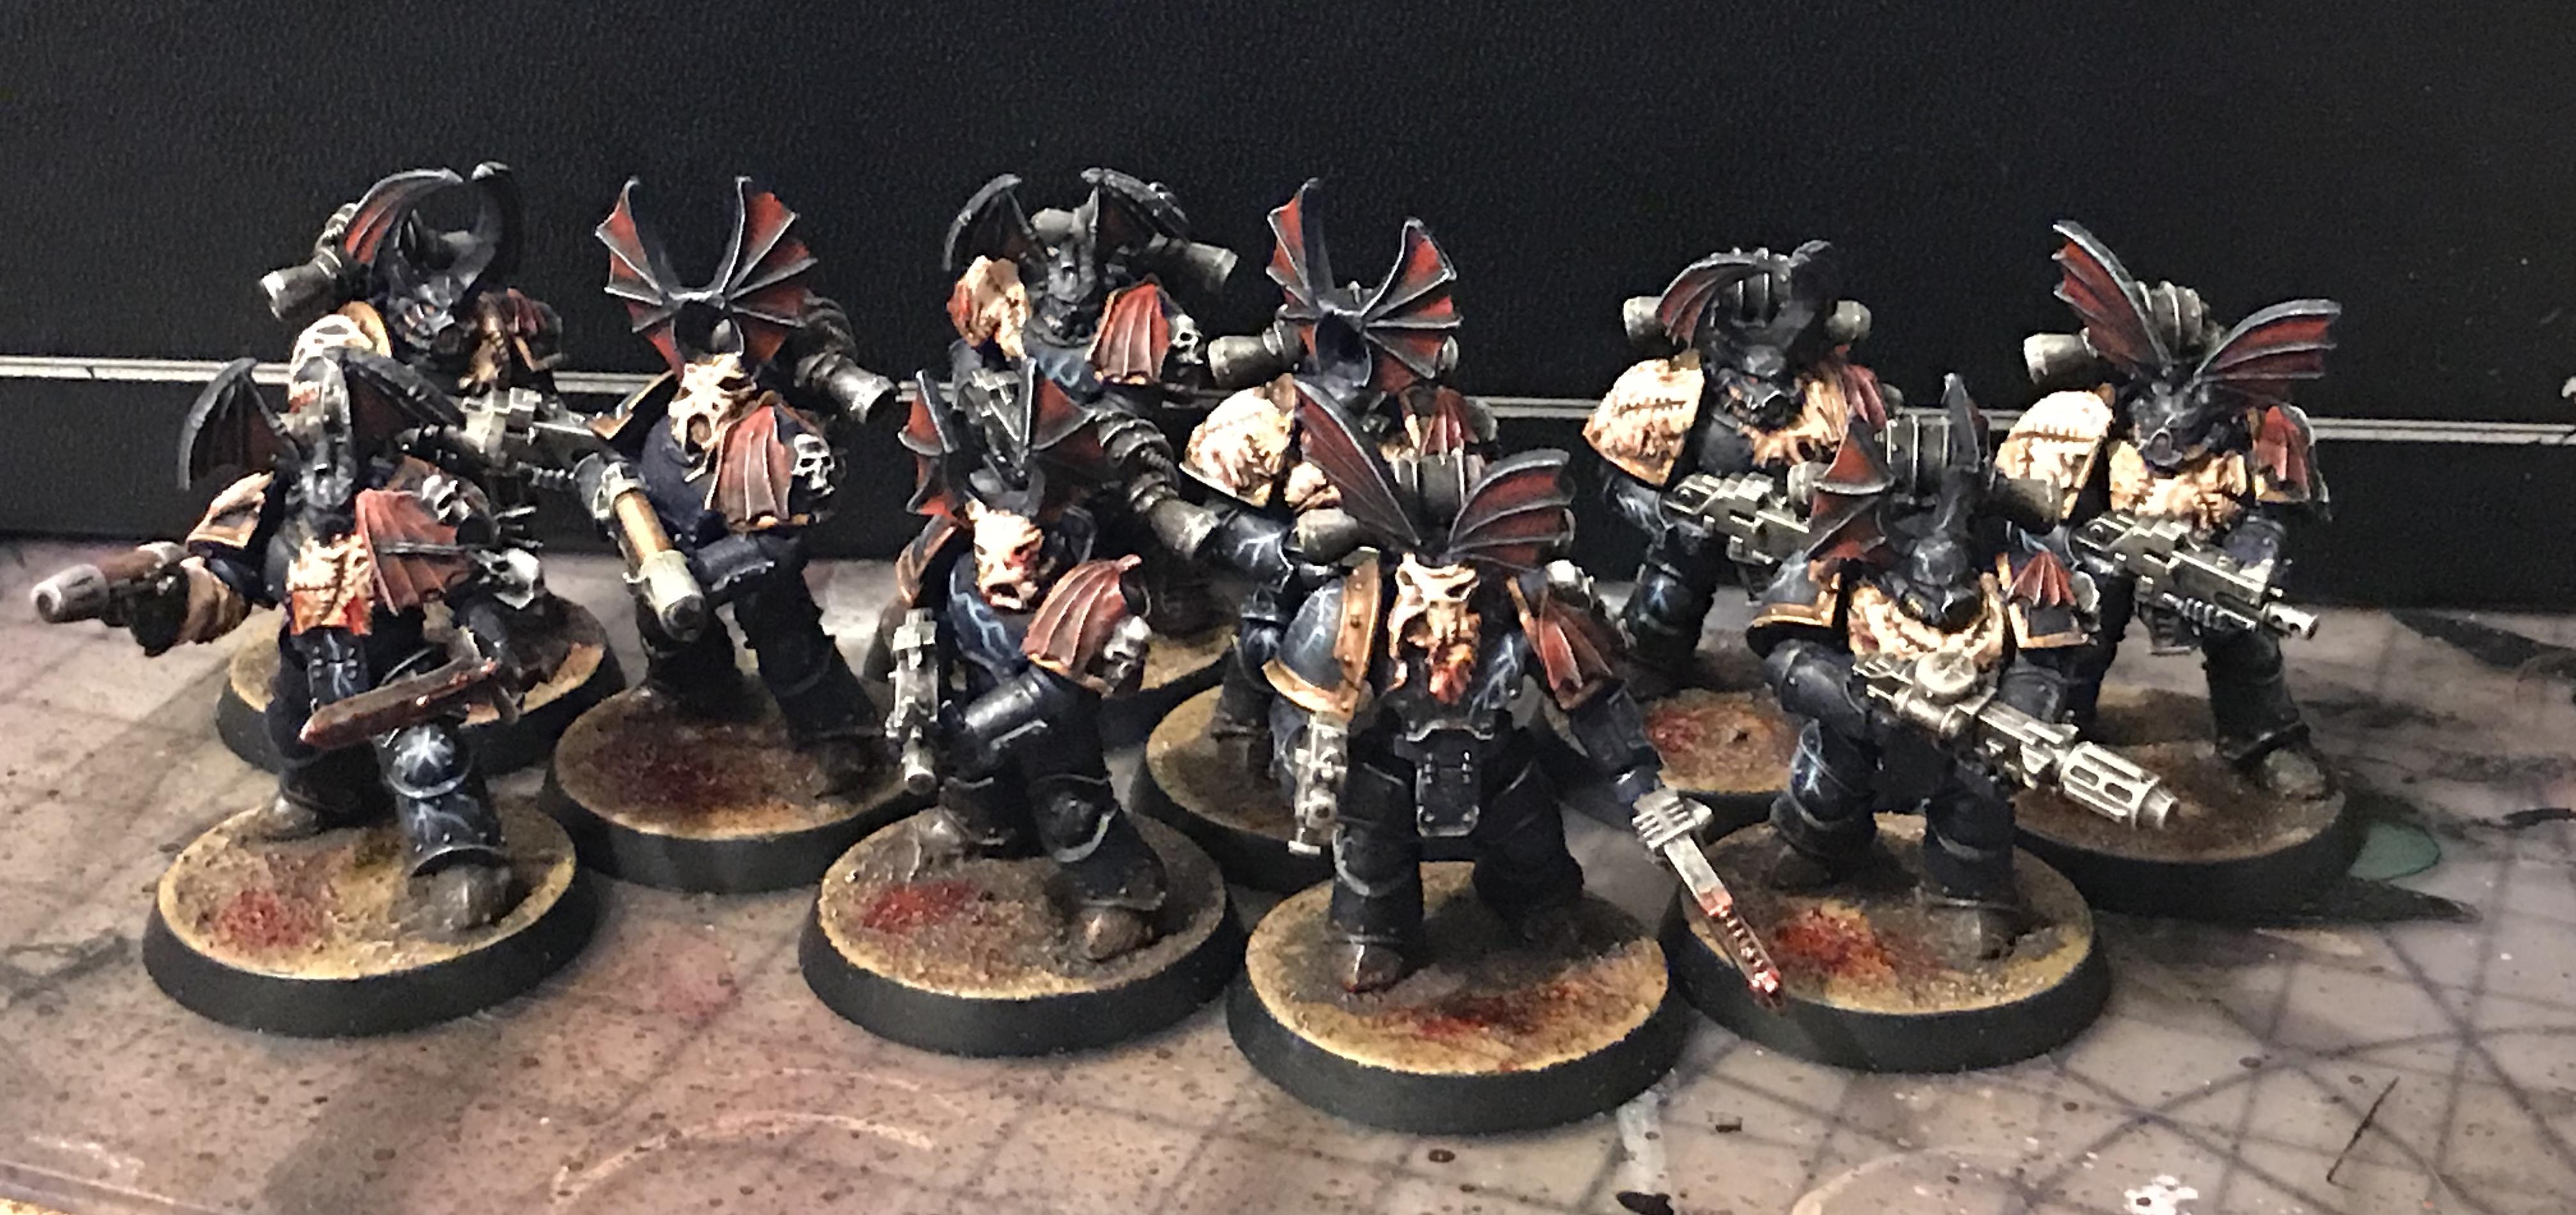 Armor, Army, Astardes, Black, Blood, Chaos, Conversion, Corrupted, Crimson, Curze, Death, Evil, Flayed, Flayer, Flesh, Grisly, Hand, Heresy, Horrors, Horus, Kaos, Kill, Killers, Kit Bash, Konrad, Legion, Legionnaire, Legionnaires, Legionnes, Legions, Lightning, Lord, Lords, Man, Mask, Murder, Murderers, Night, Night Lords, Pained, Pirate, Pirates, Power, Primarch, Rage, Raiders, Reaver, Reavers, Red, Renegade, Renegades, Saboteur, Sculpting, Shadow, Shroud, Skin, Soul, Space, Space Marines, Stalkers, Stealth, Tactics, Team, Terror, Torture, Traitor, Traitors, Trophies, Twisted, Vile, Violence, Violent